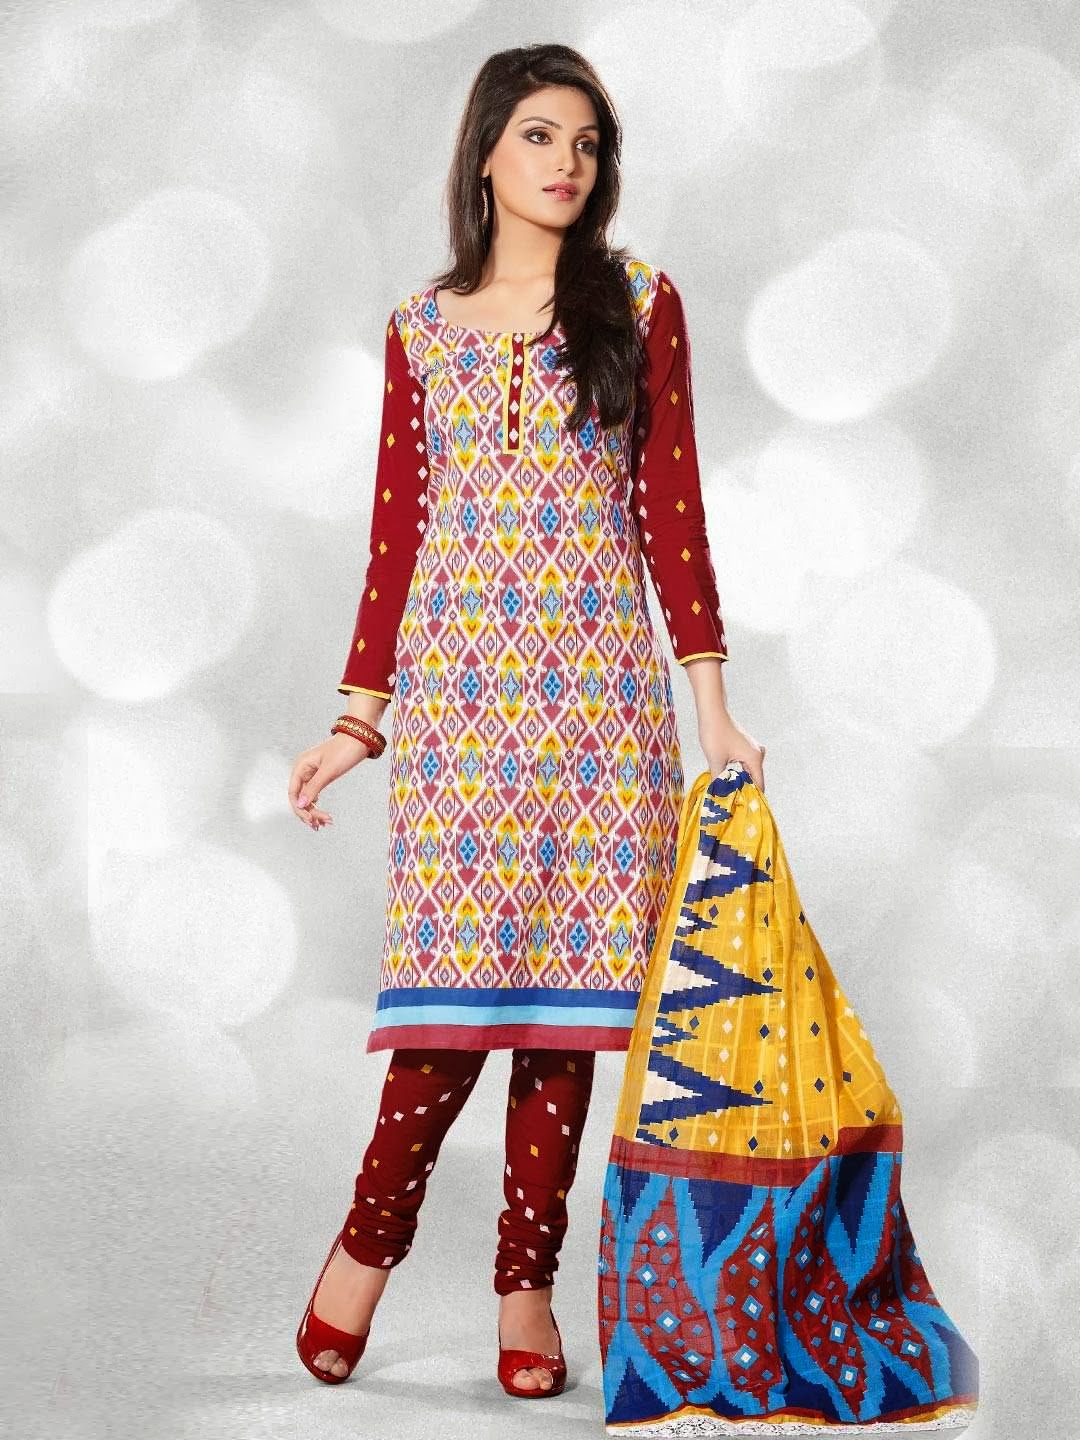 http://linksredirect.com?pub_id=1318CL1274&url=http%3A//www.myntra.com/dress-material/span/span-red-yellow-printed-dress-material/127300/buy%3Ft_code%3D6cfb7dc0e63b4c6fa624a575db3723eb%26previous_style_id%3D127287%26previous_recommendation_type%3Davail%26previous_recommendation_styleids%3D127288%2C127300%2C127296%2C127286%2C102506%26src%3Dpp